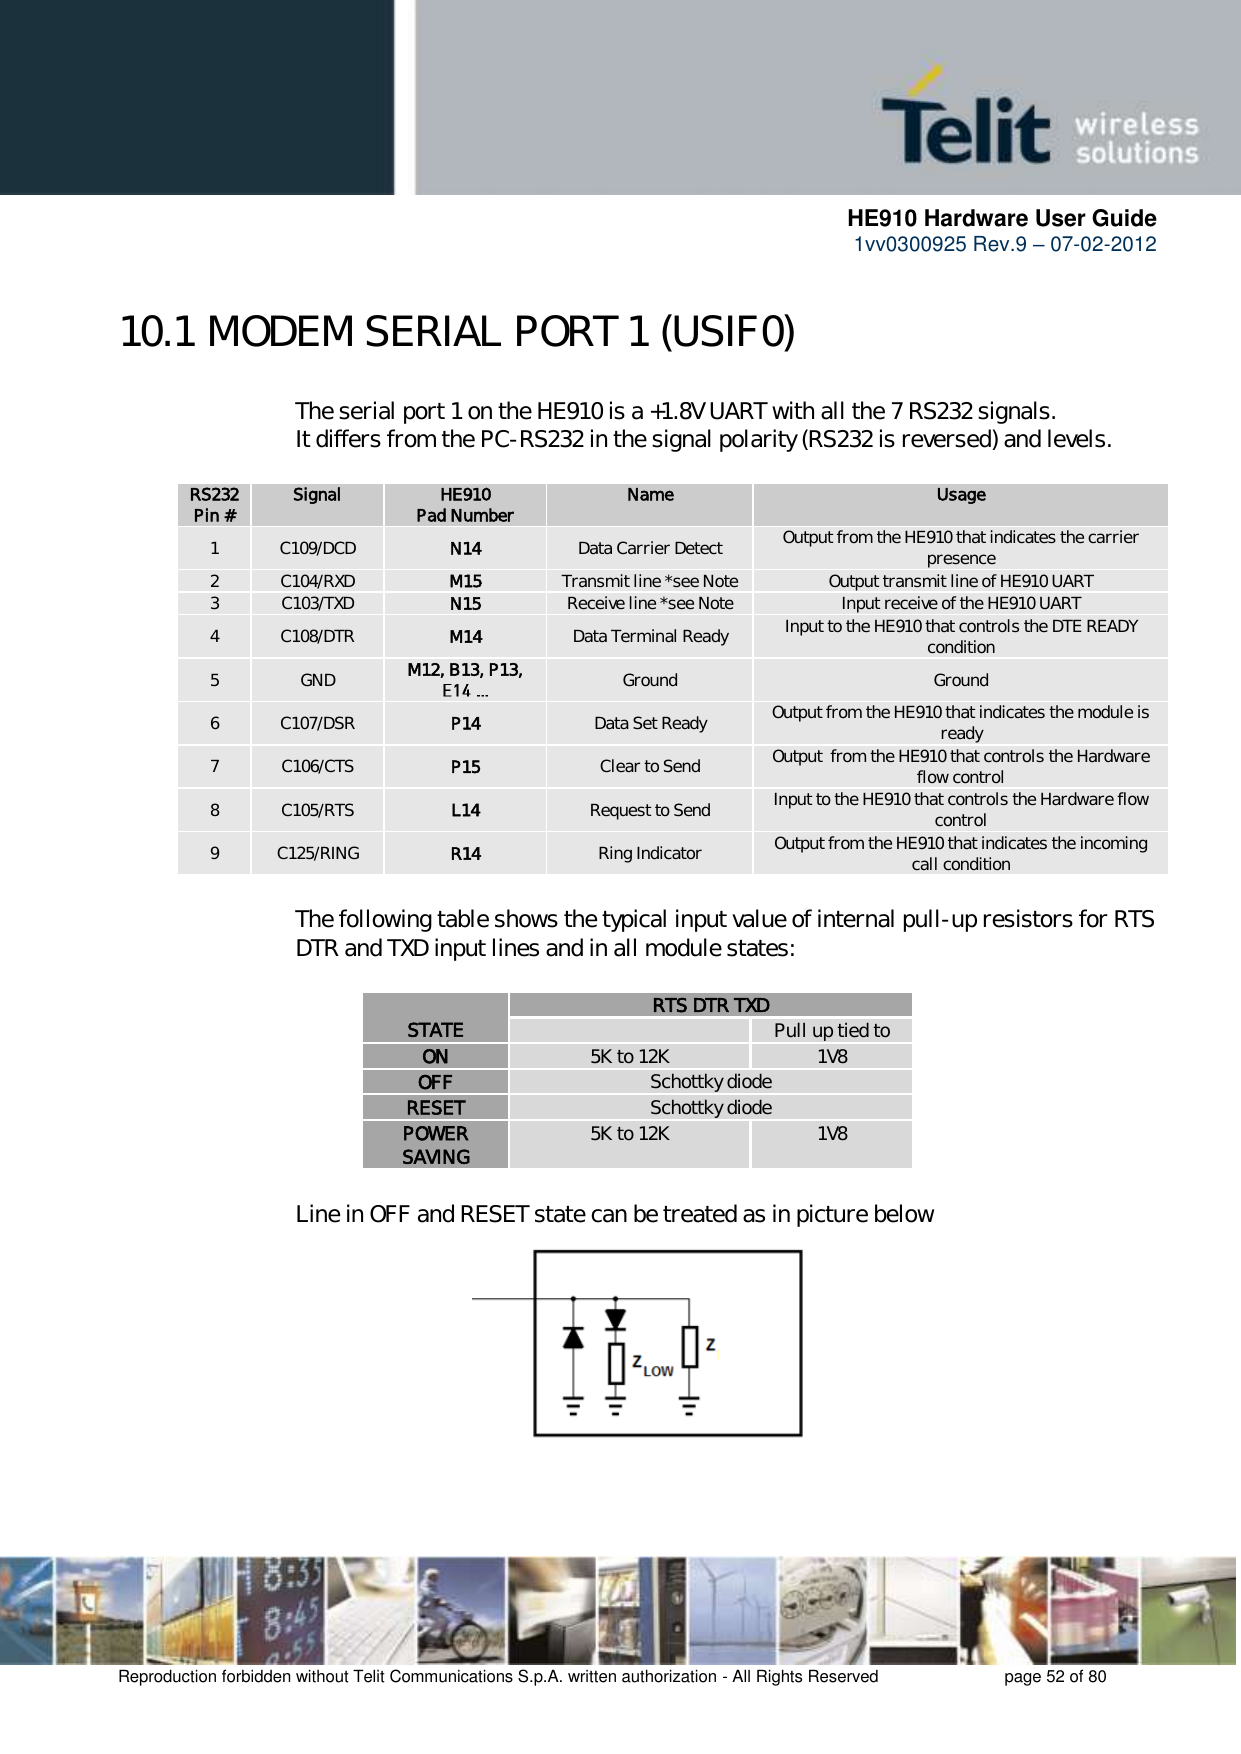      HE910 Hardware User Guide 1vv0300925 Rev.9 – 07-02-2012    Reproduction forbidden without Telit Communications S.p.A. written authorization - All Rights Reserved    page 52 of 80  10.1 MODEM SERIAL PORT 1 (USIF0)     The serial port 1 on the HE910 is a +1.8V UART with all the 7 RS232 signals.      It differs from the PC-RS232 in the signal polarity (RS232 is reversed) and levels.    RS232 Pin # Signal HE910 Pad Number Name Usage 1 C109/DCD N14 Data Carrier Detect Output from the HE910 that indicates the carrier presence 2 C104/RXD M15 Transmit line *see Note Output transmit line of HE910 UART 3 C103/TXD N15 Receive line *see Note Input receive of the HE910 UART 4 C108/DTR M14 Data Terminal Ready Input to the HE910 that controls the DTE READY condition 5 GND M12, B13, P13,  Ground Ground 6 C107/DSR P14 Data Set Ready Output from the HE910 that indicates the module is ready 7 C106/CTS P15 Clear to Send Output  from the HE910 that controls the Hardware flow control 8 C105/RTS L14 Request to Send Input to the HE910 that controls the Hardware flow control 9 C125/RING R14 Ring Indicator Output from the HE910 that indicates the incoming call condition  The following table shows the typical input value of internal pull-up resistors for RTS  DTR and TXD input lines and in all module states:   STATE RTS DTR TXD  Pull up tied to ON 5K to 12K 1V8 OFF Schottky diode RESET Schottky diode POWER SAVING 5K to 12K 1V8  Line in OFF and RESET state can be treated as in picture below           